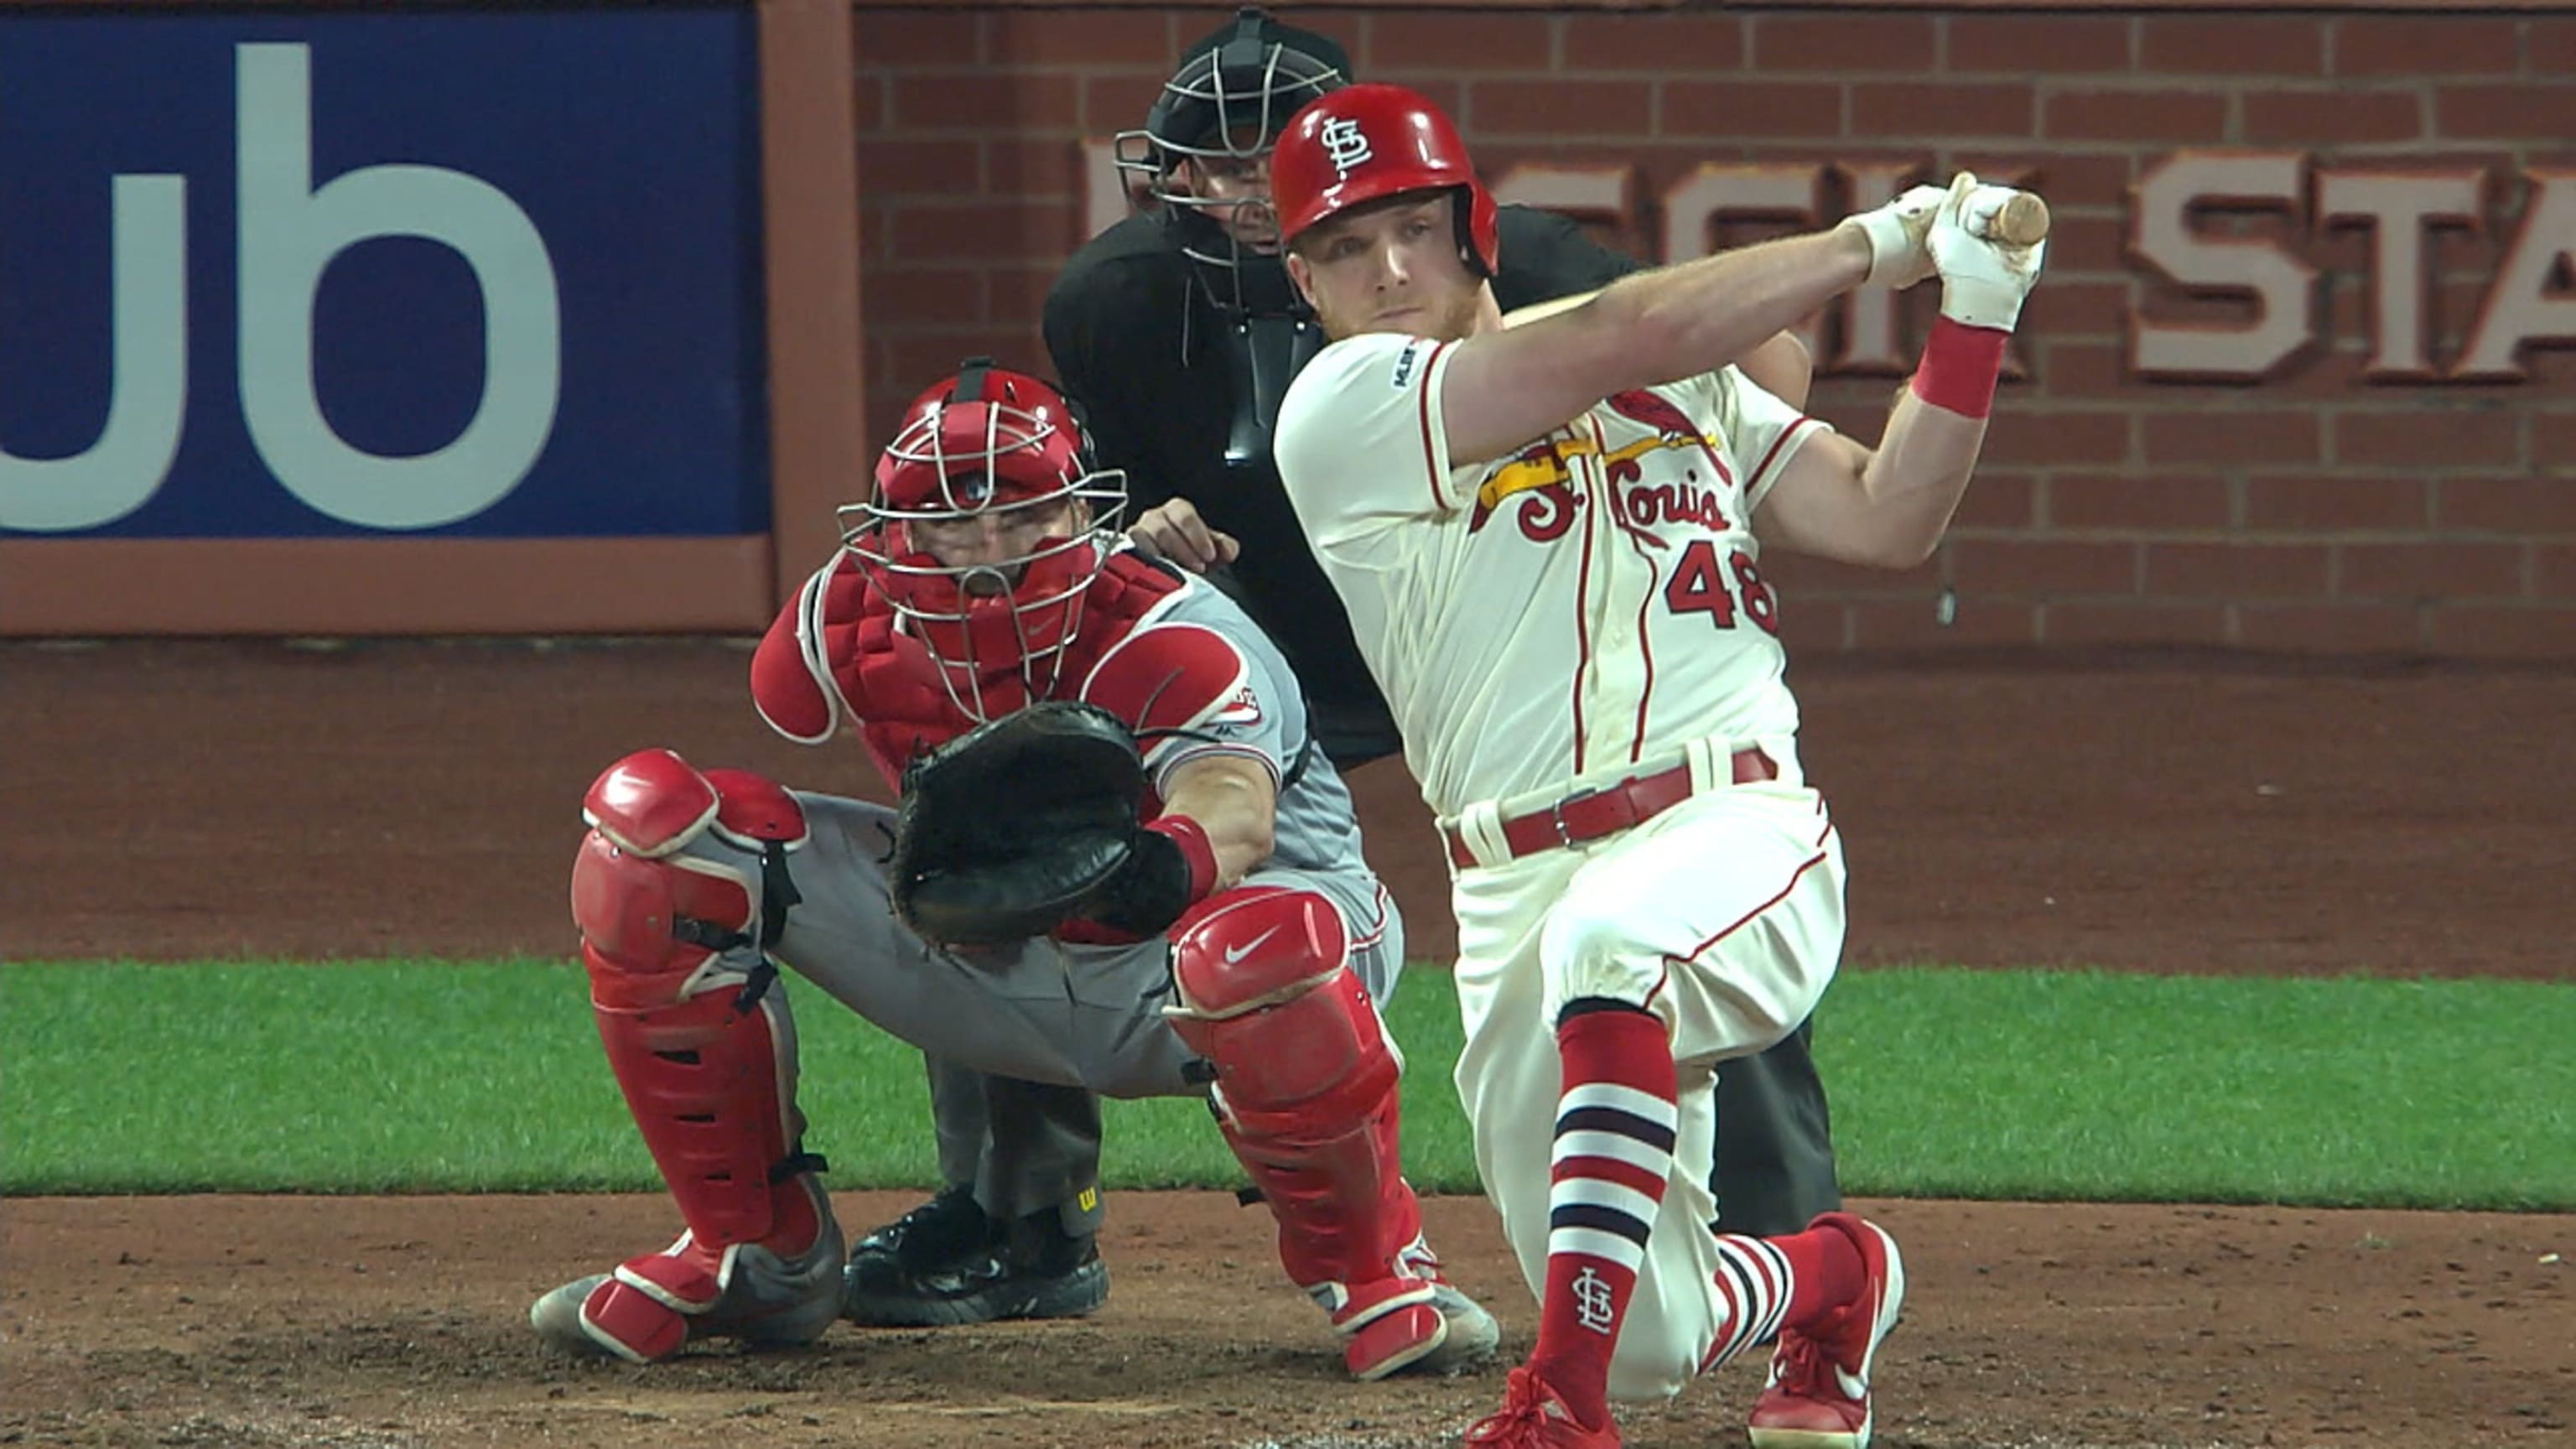 St. Louis Cardinals stave off elimination with miraculous comeback